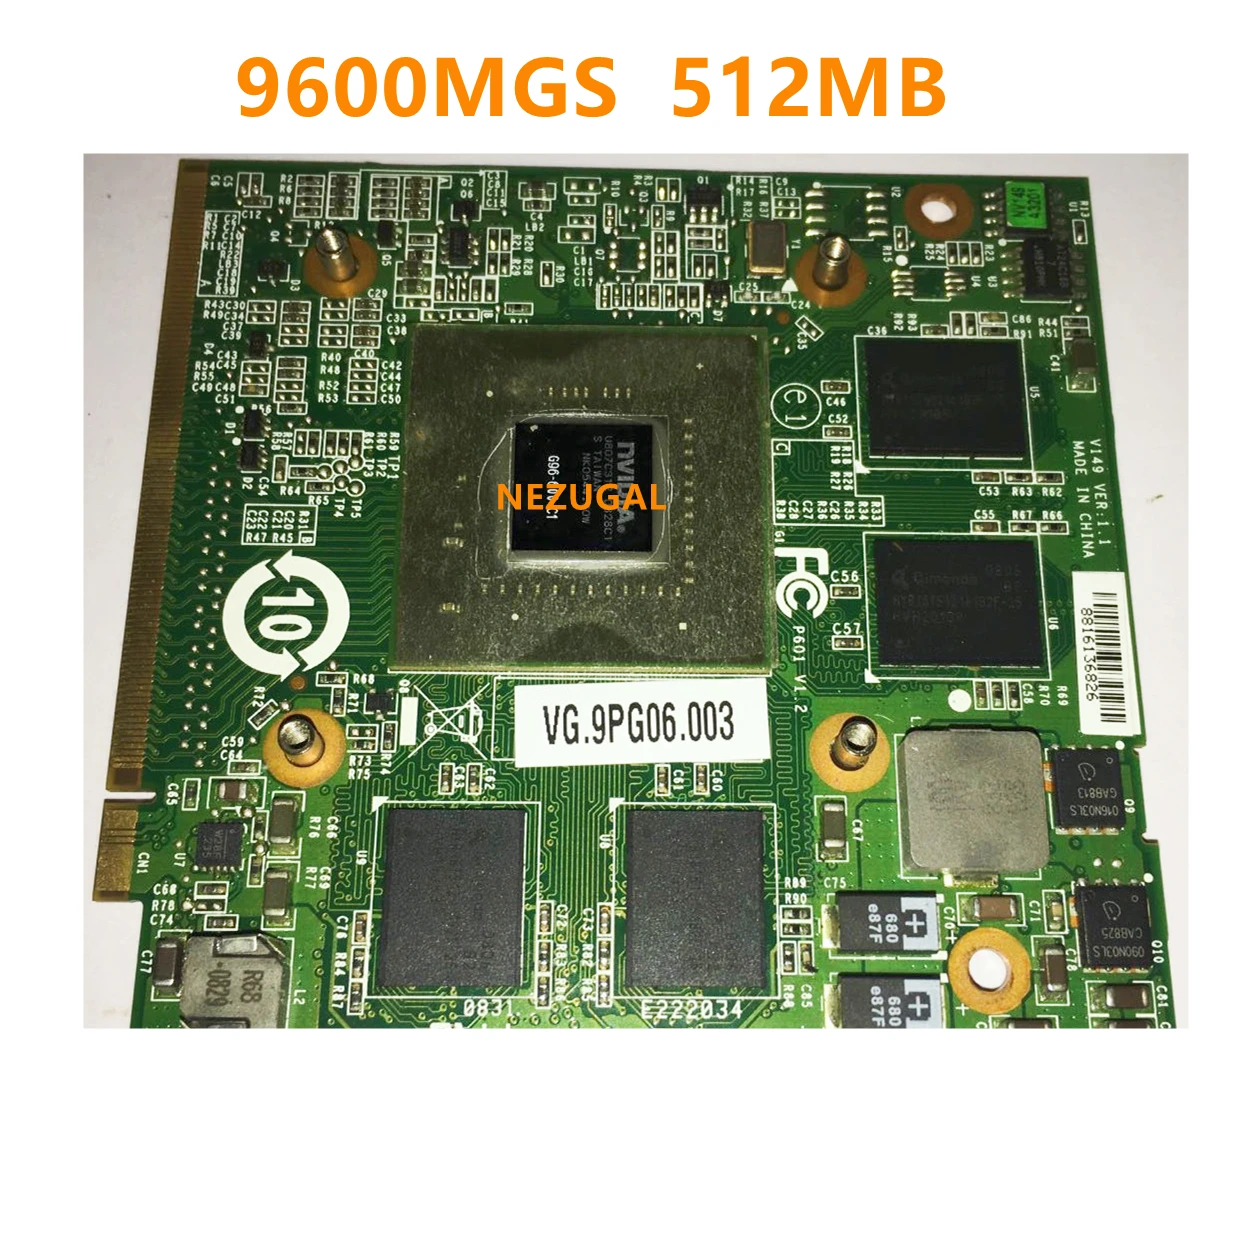 

GeForce 9600MGS 9600M GS DDR2 512MB MXM II G96-600-C1 Video Card for Acer Aspire 4720 4920G 4930G 6920G 6930G 6935G 7720G Laptop